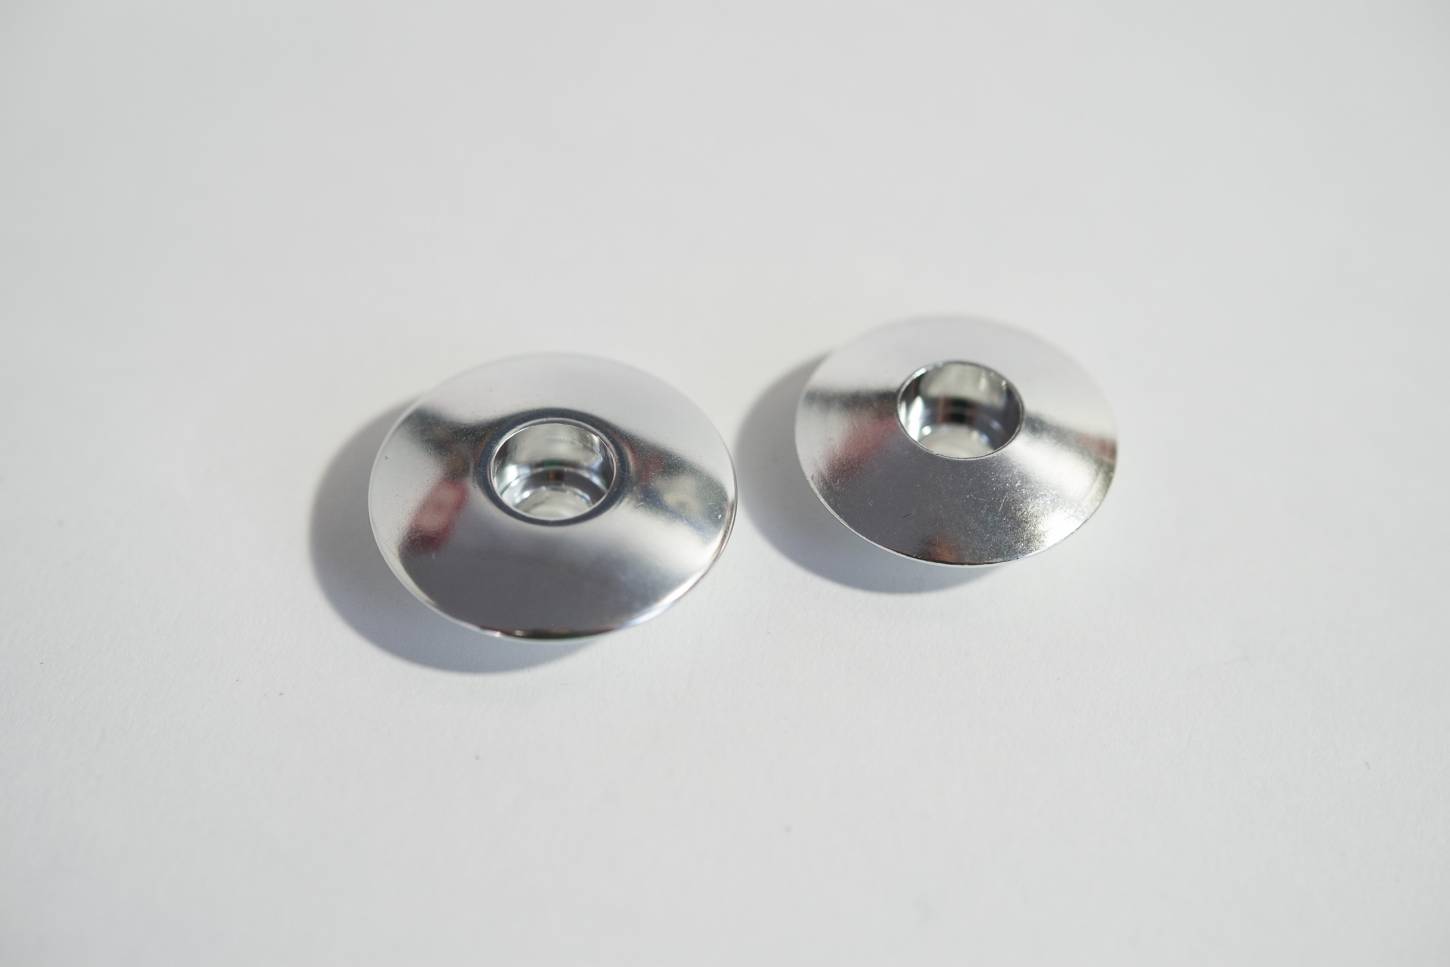 End cap for 1" or 1 1/8" Ahead headset aluminium in silver or black